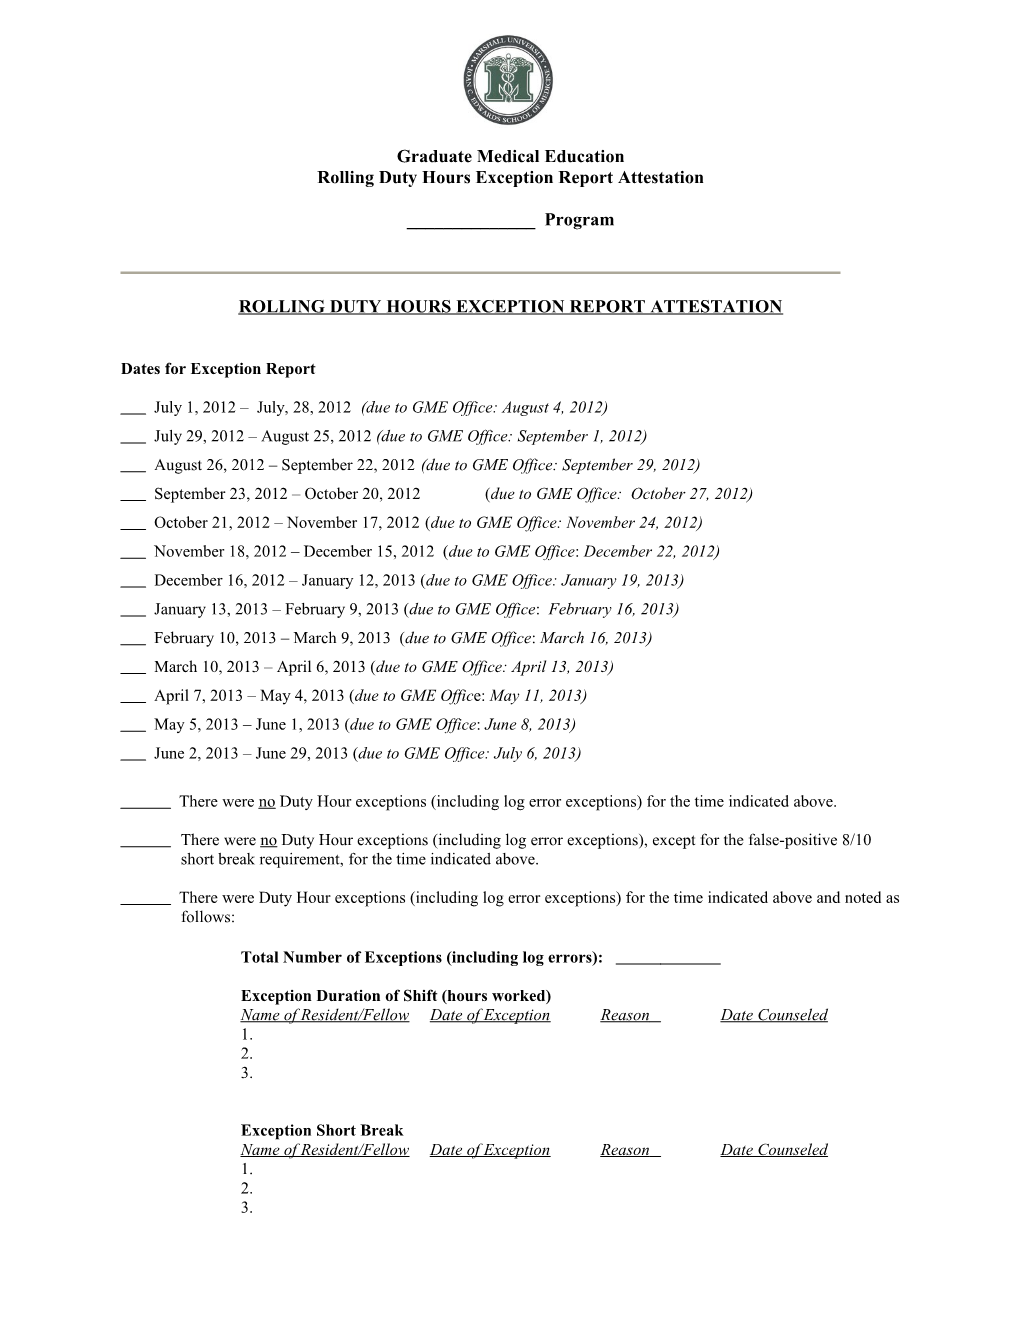 Rolling Duty Hours Exception Report Attestation